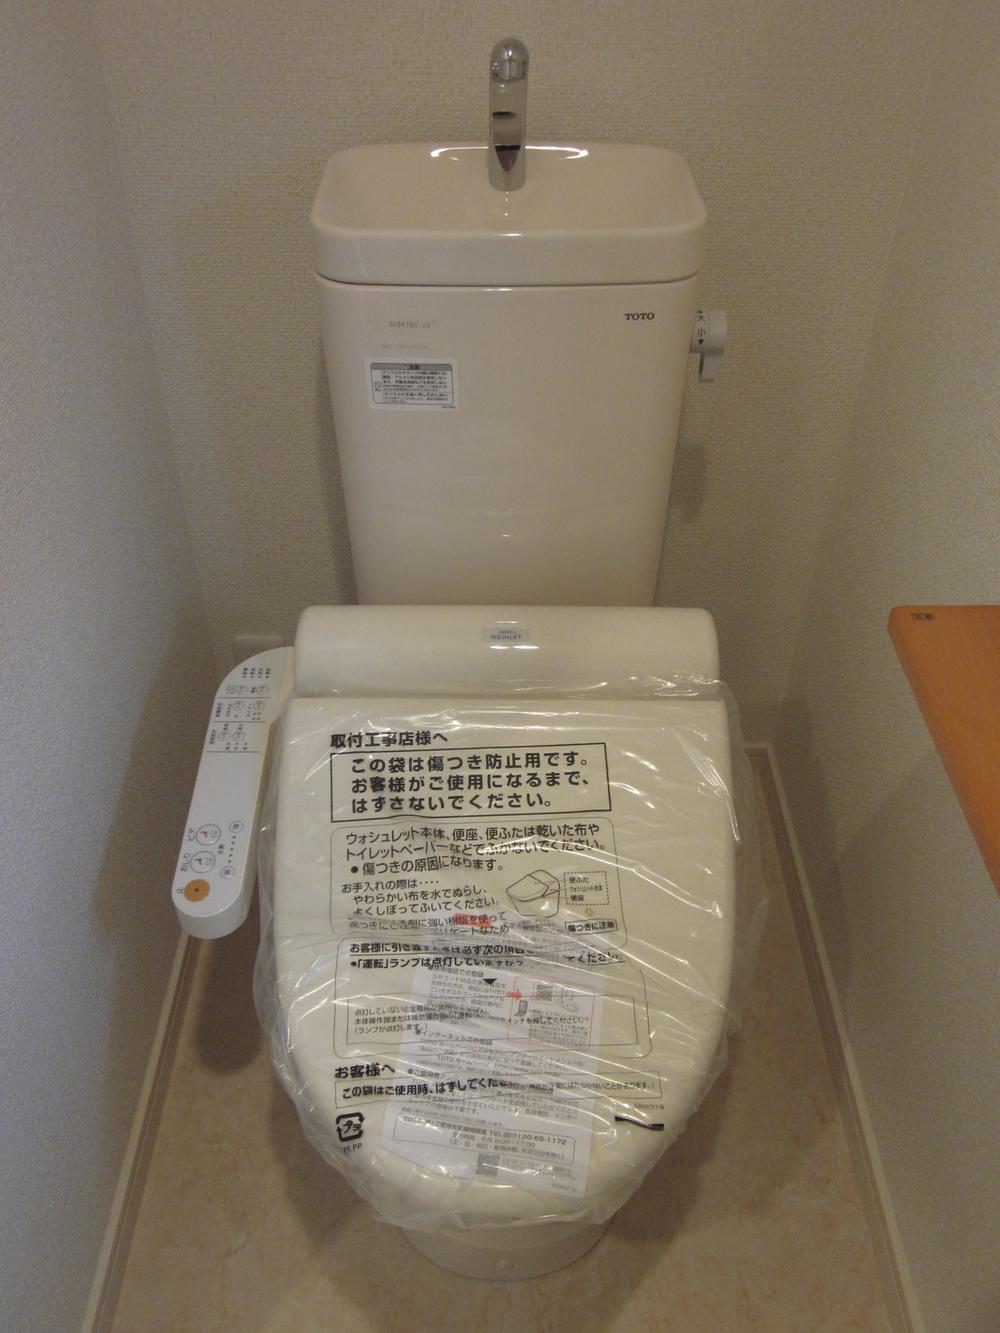 Toilet. Indoor (10 May 2013) Shooting ※ It will be the example of construction.